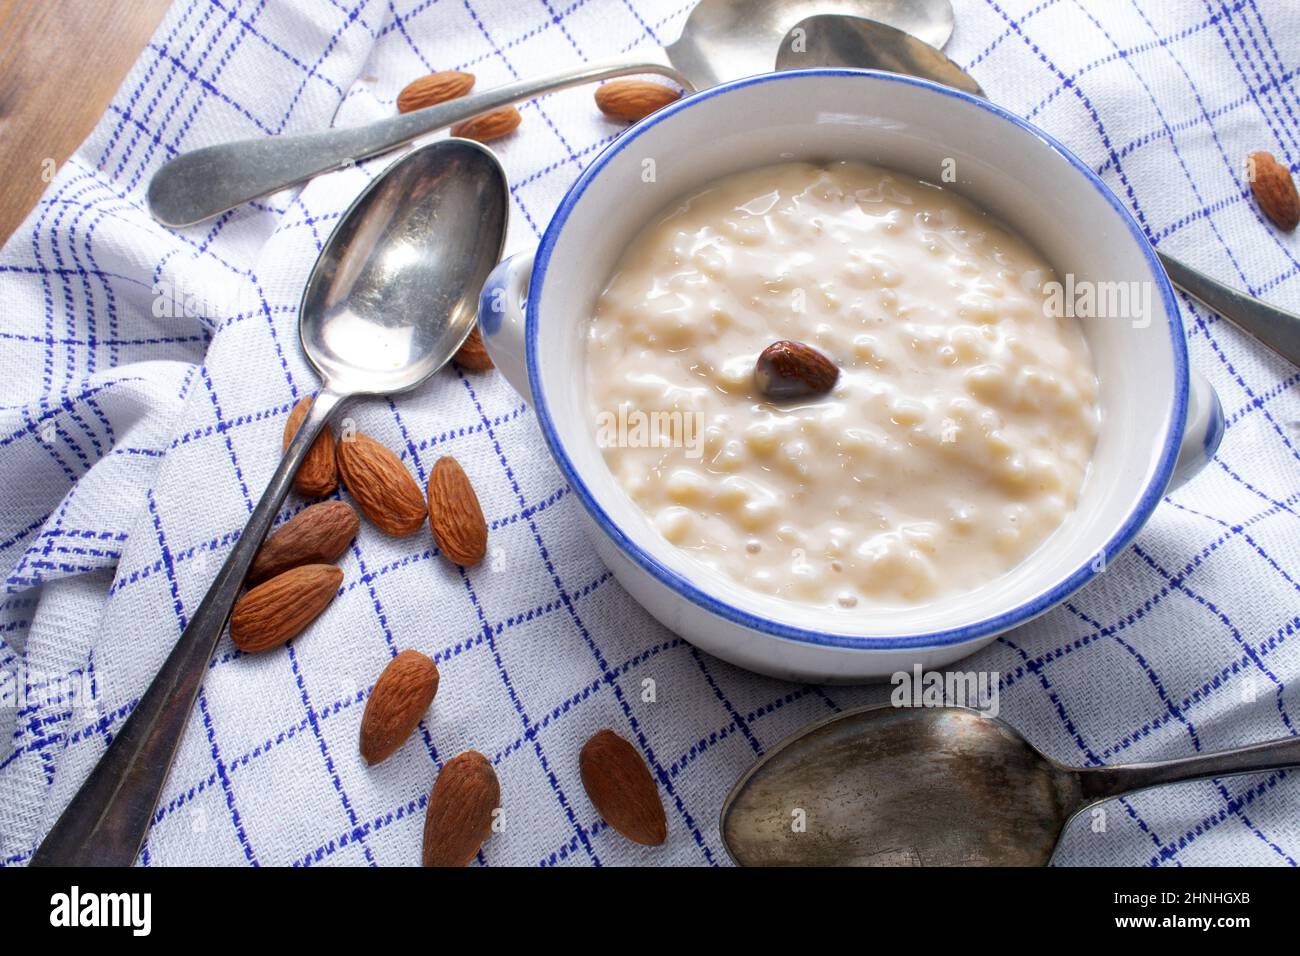 homemade rice pudding topped with an almond, a christmas tradition in finland Stock Photo